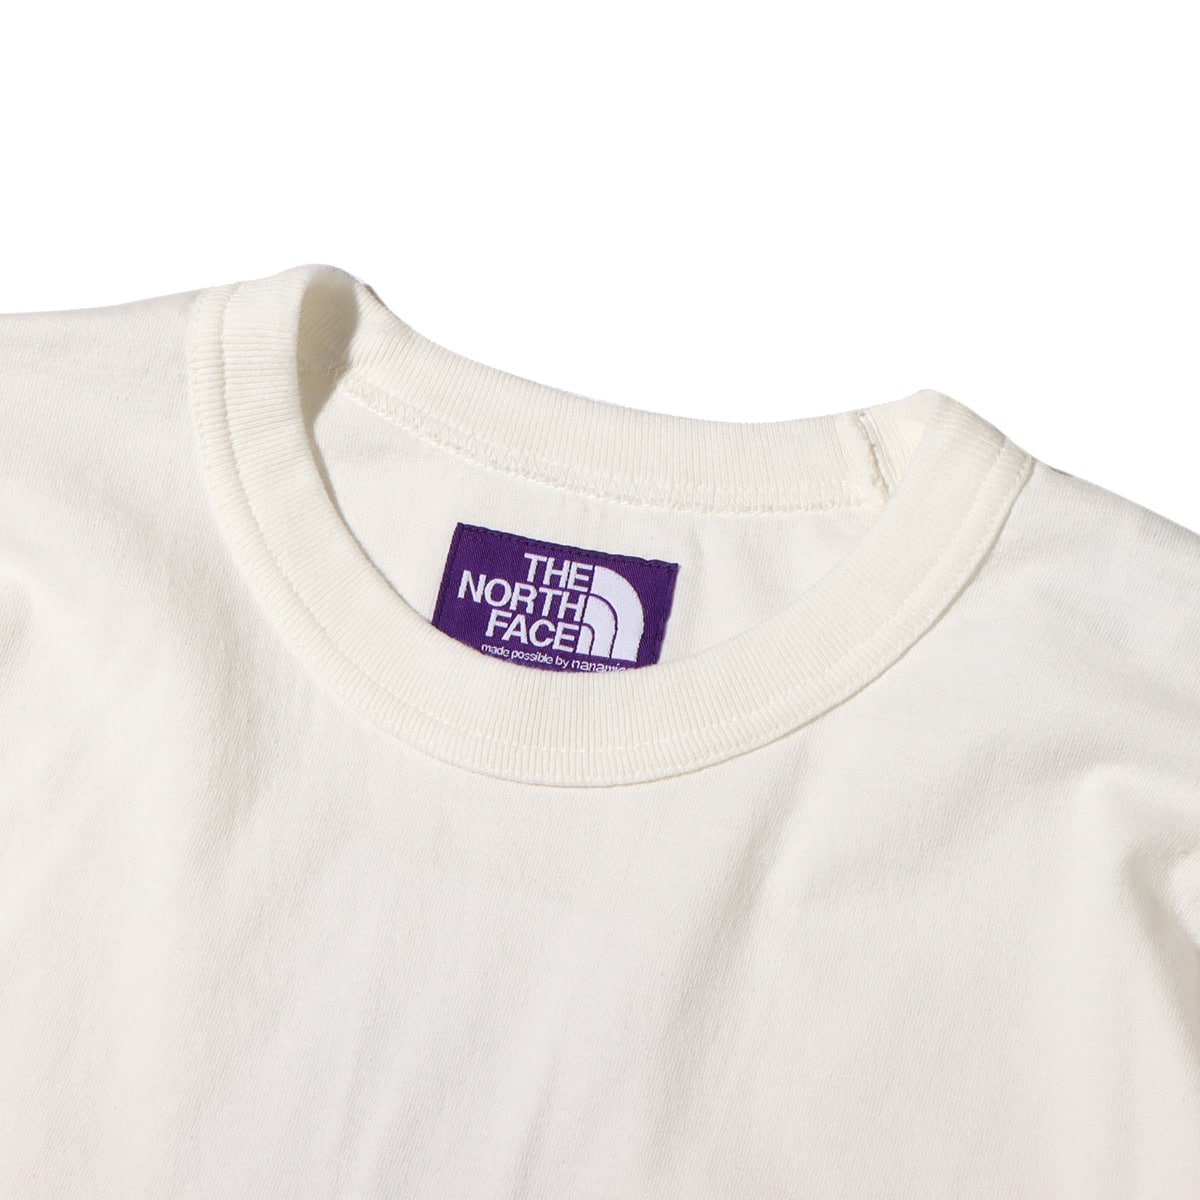 THE NORTH FACE PURPLE LABEL 7oz Pocket Tee Off White 23FW-I